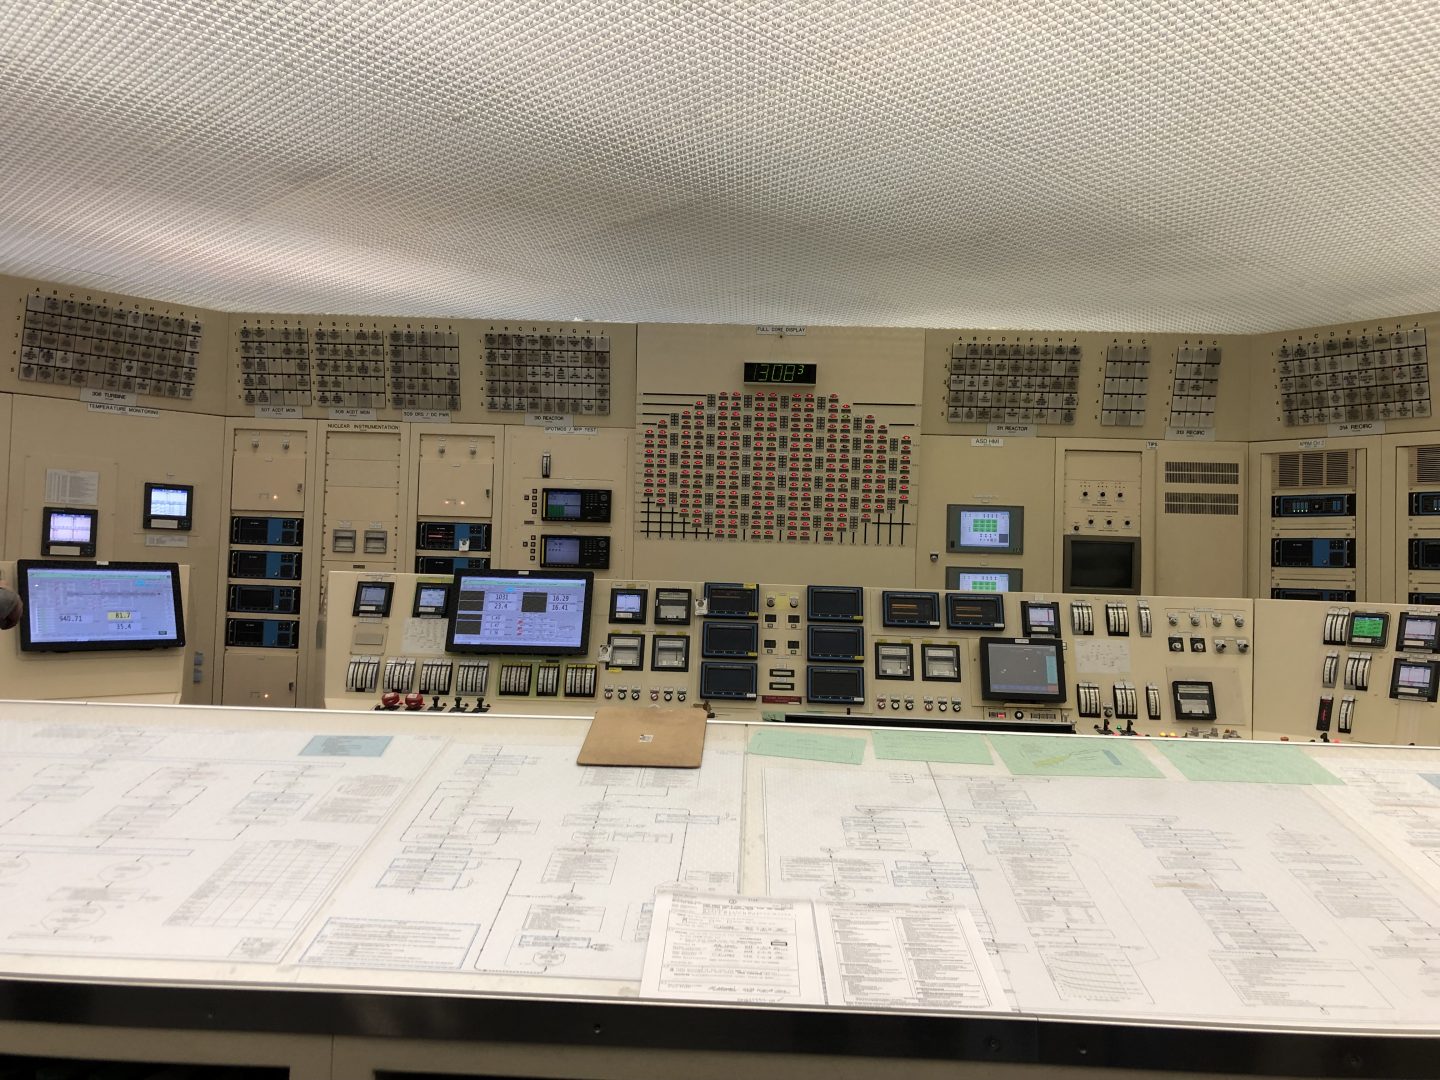 The control room at Peach Bottom Atomic Power Station is seen on Feb. 19, 2019.